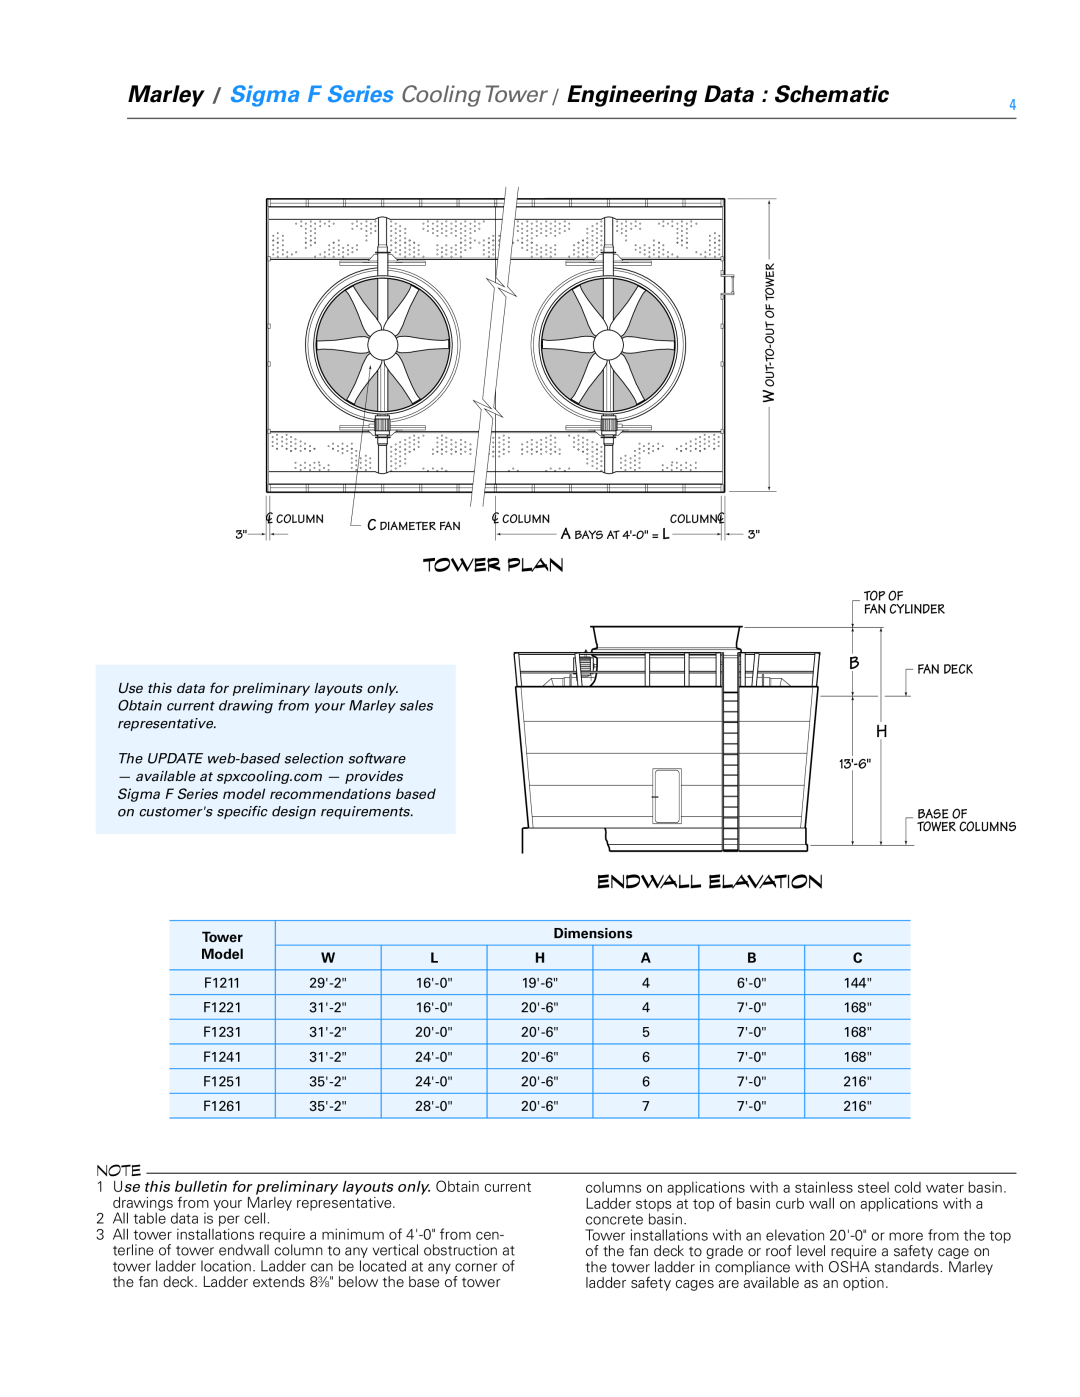 SPX Cooling Technologies FSIG-TS-08A specifications Tower Plan, Endwall Elavation 